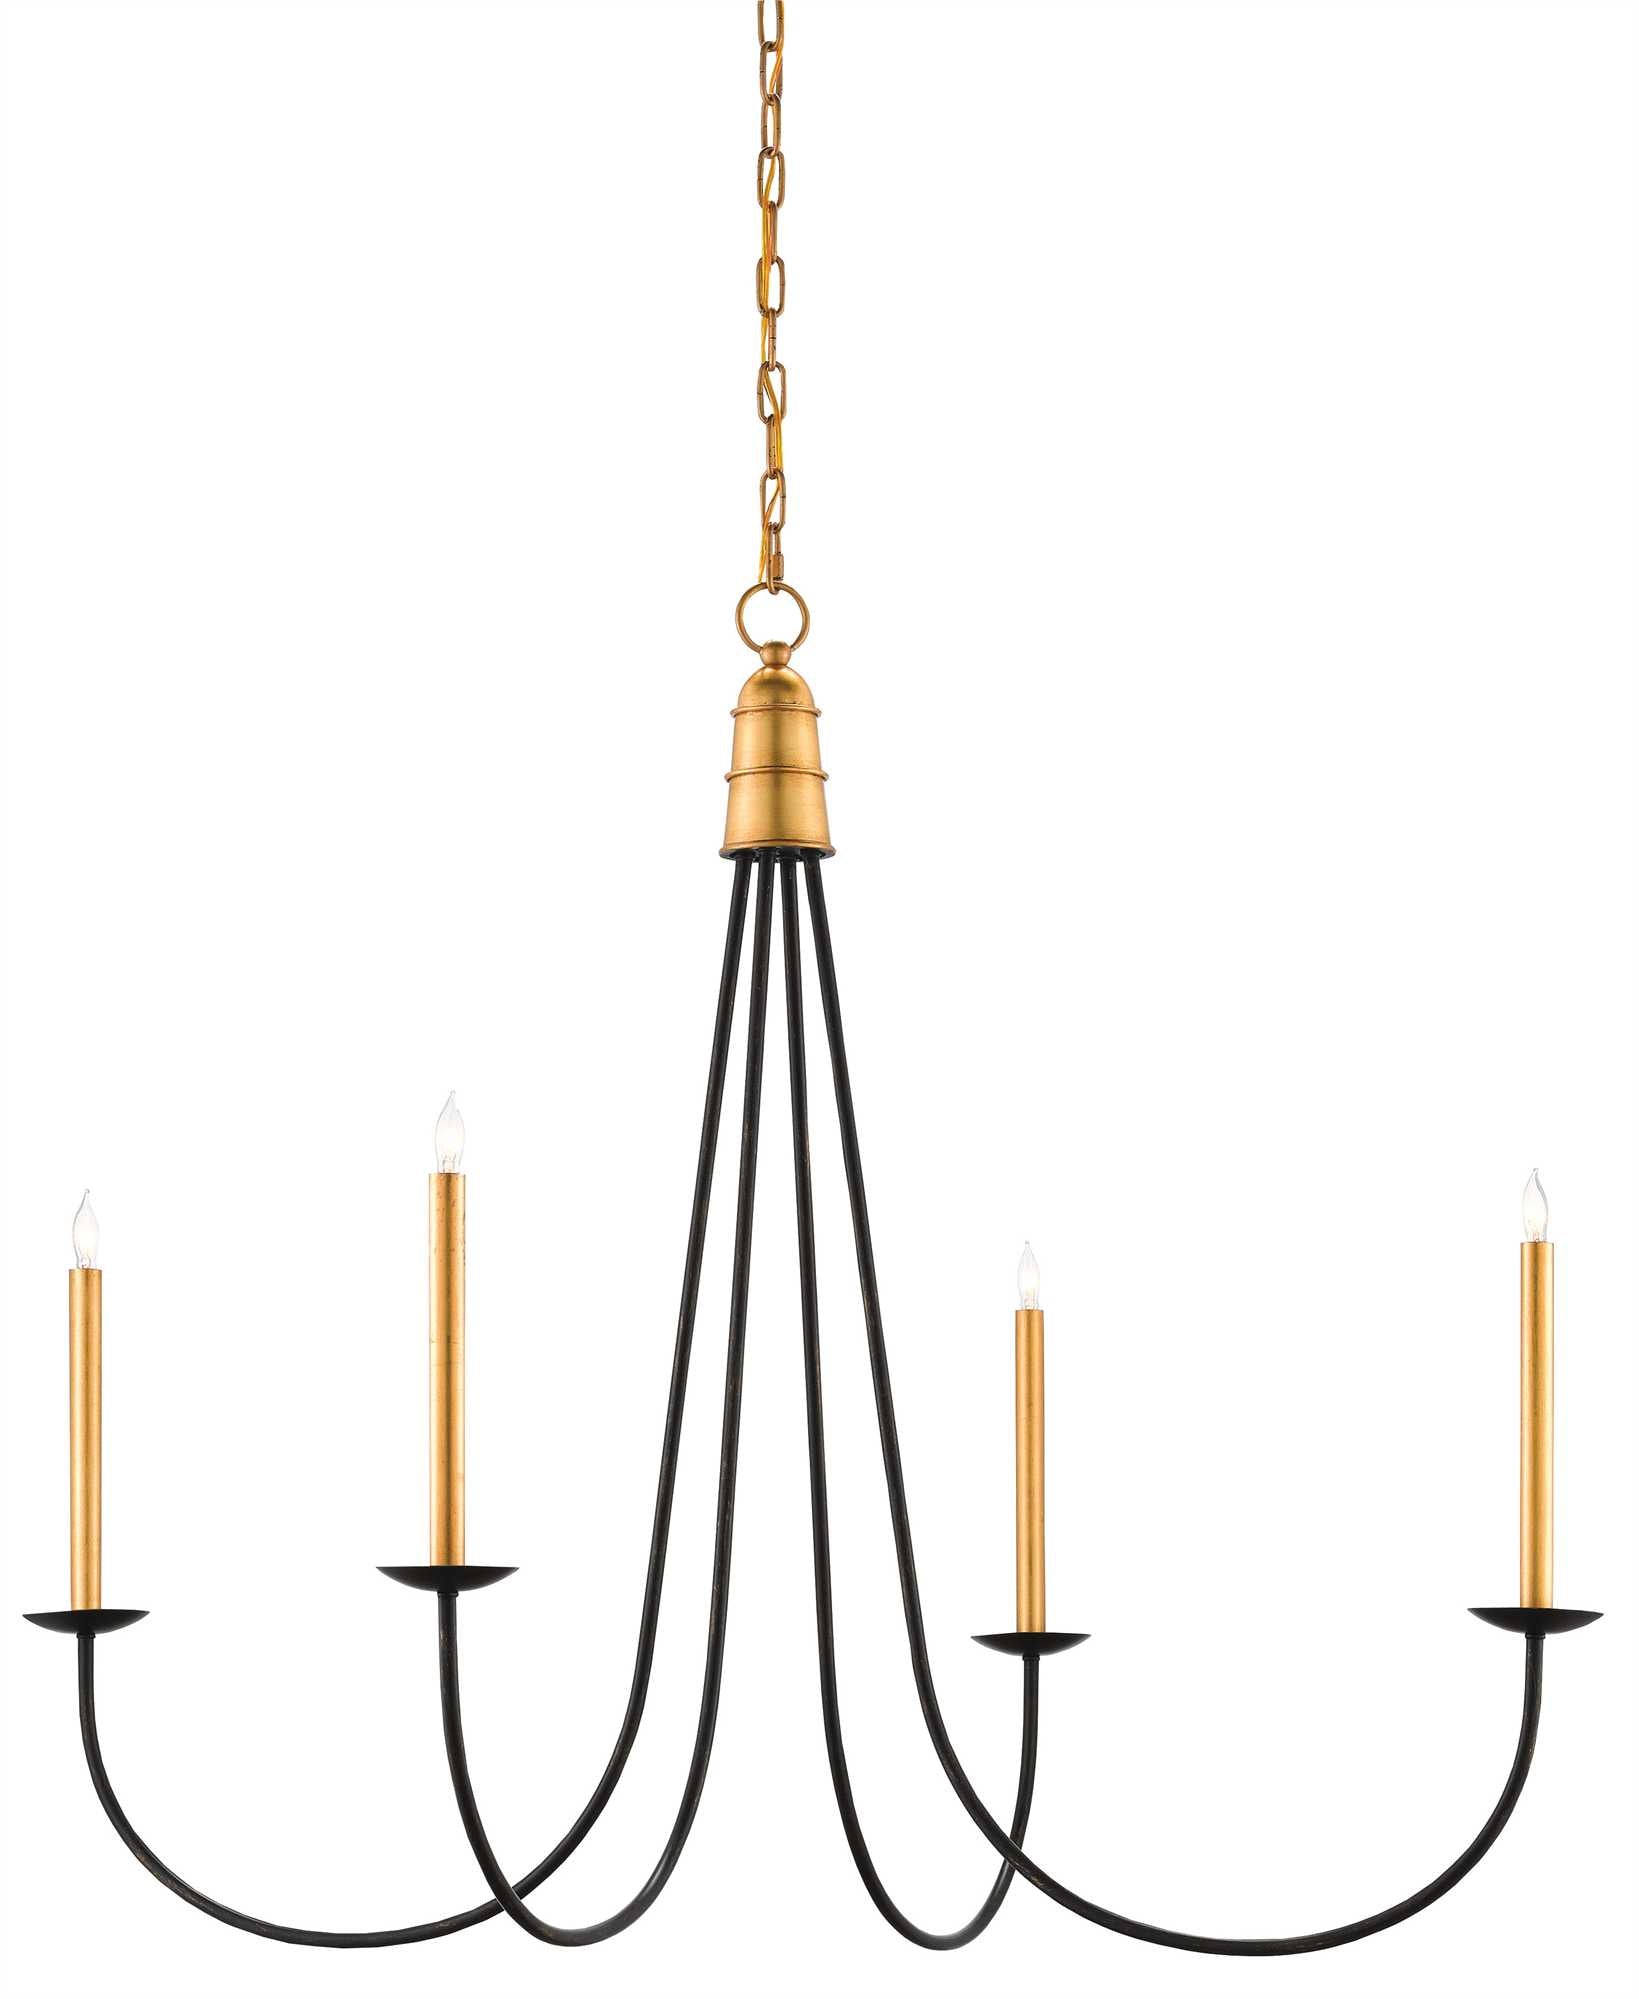 black iron and gold candlestick chandelier, traditional farmhouse chandelier lighting 